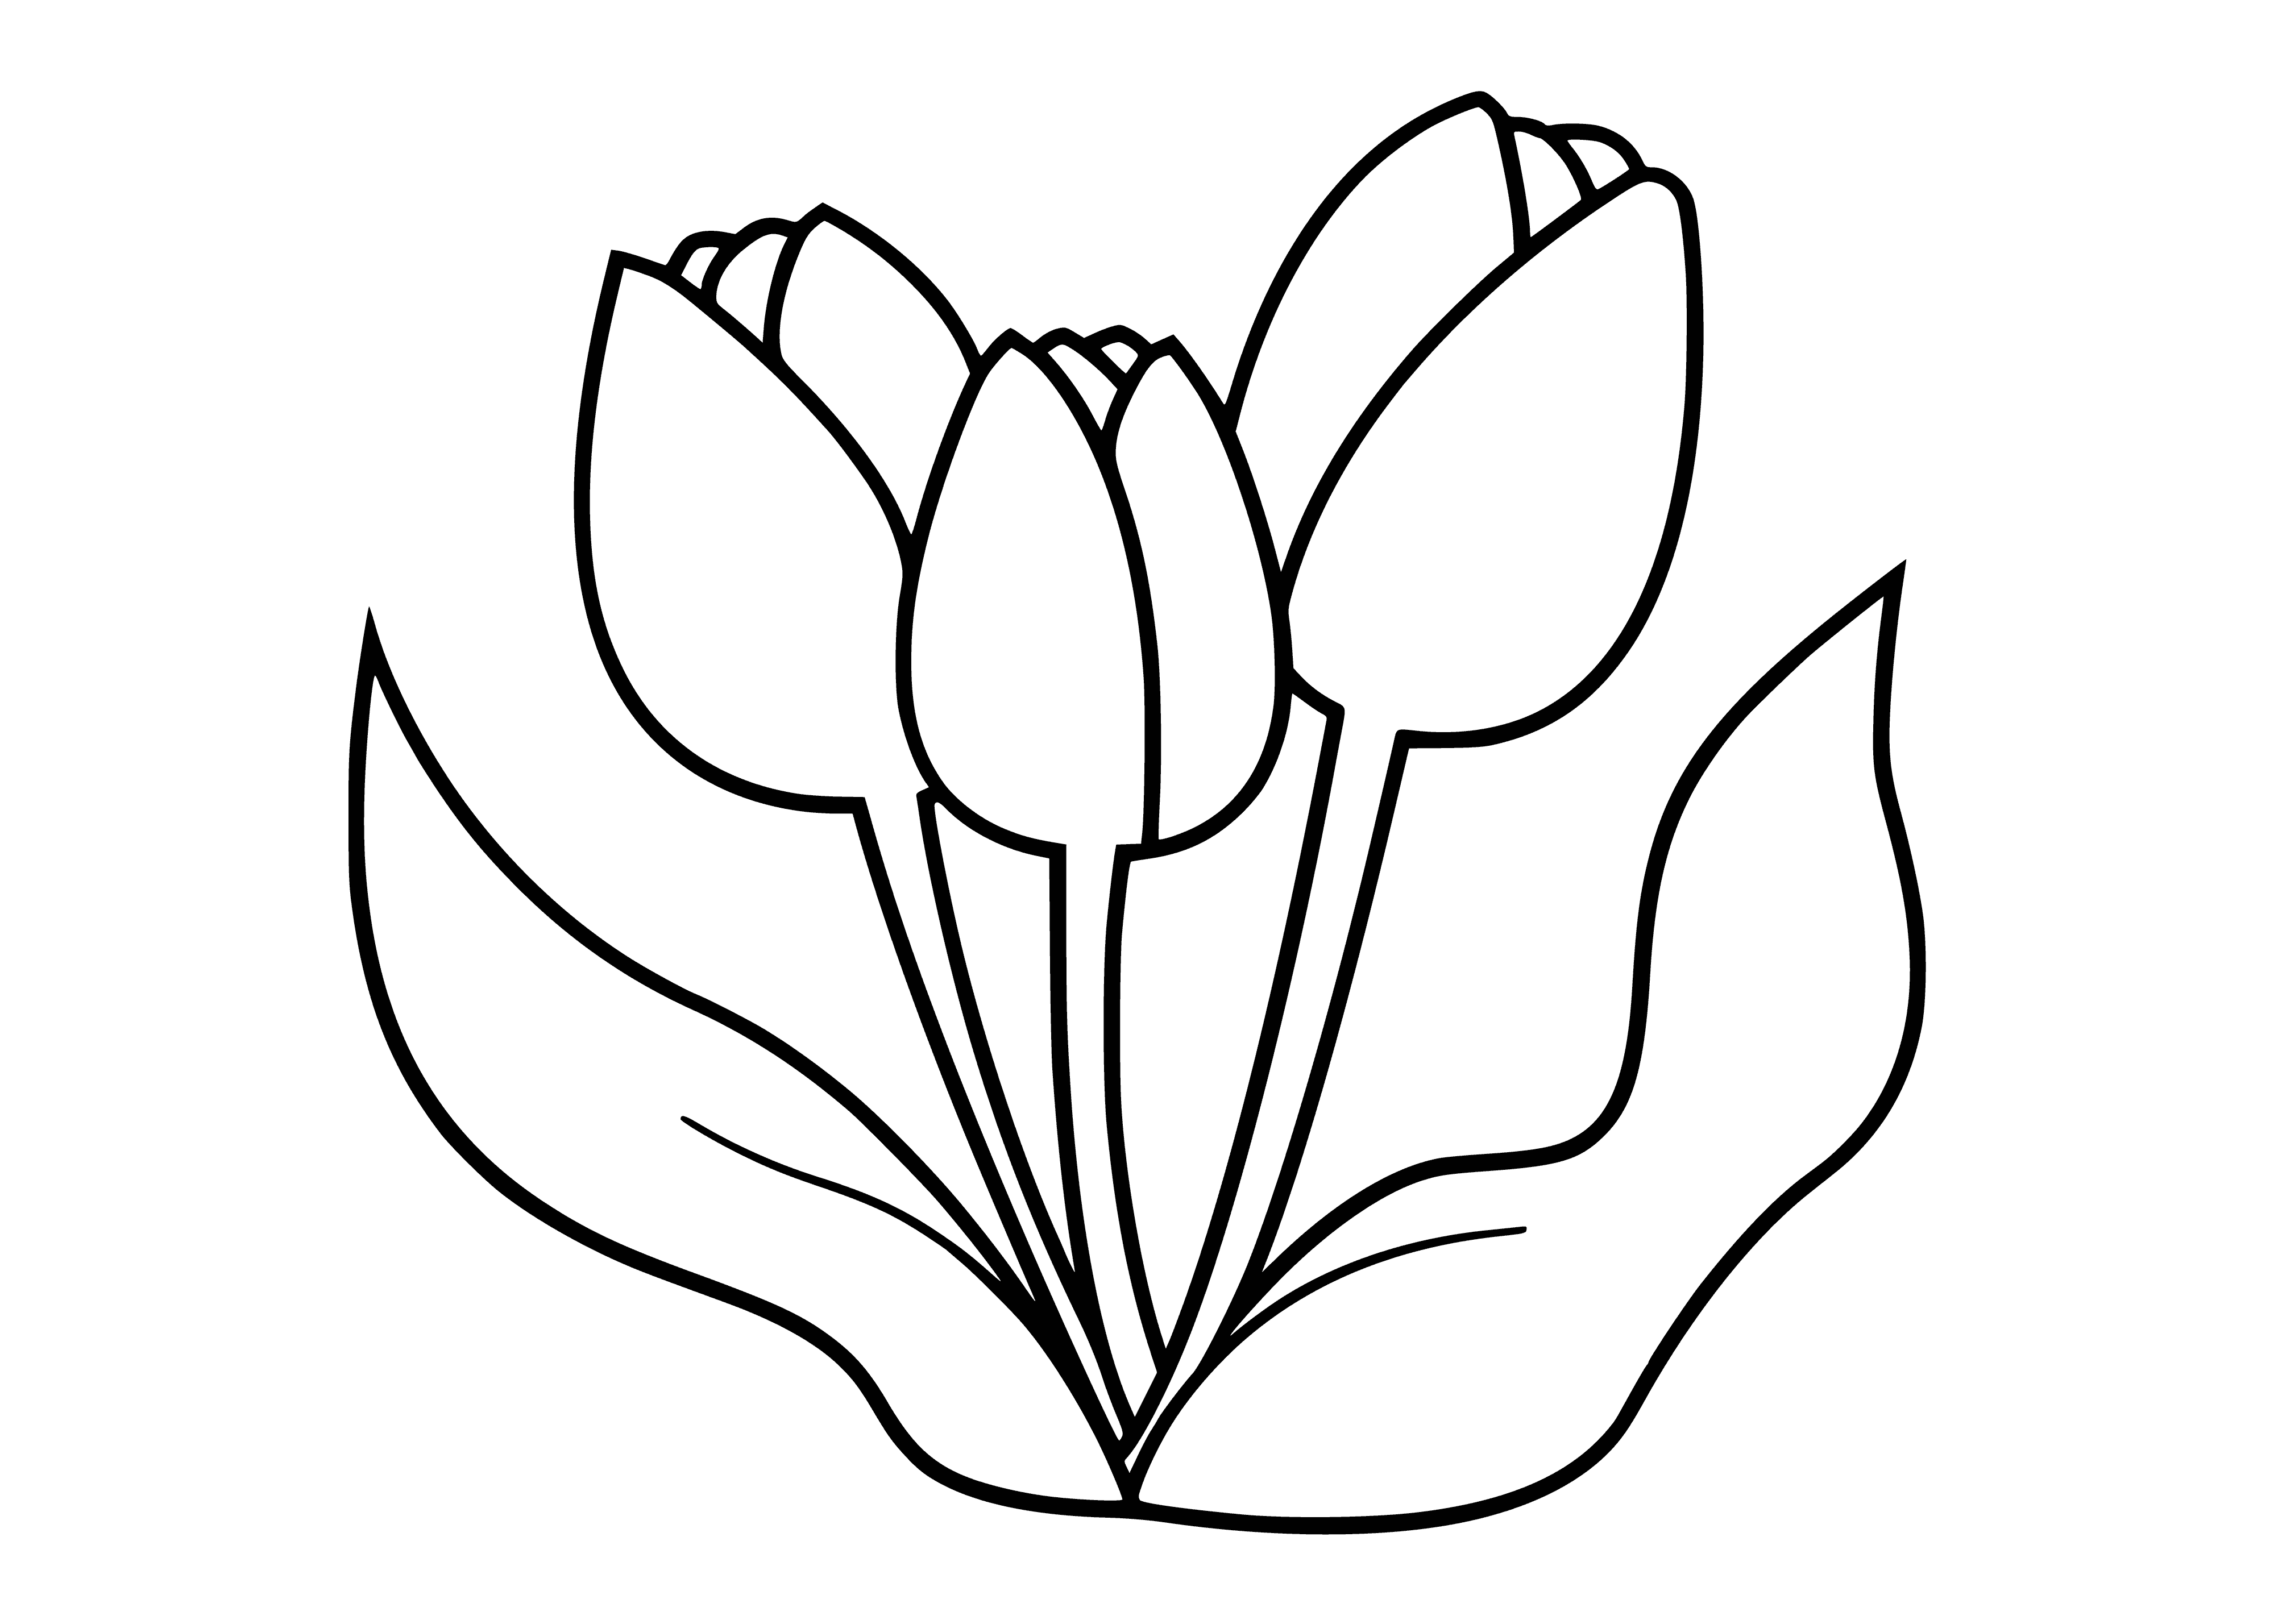 Tulips coloring page